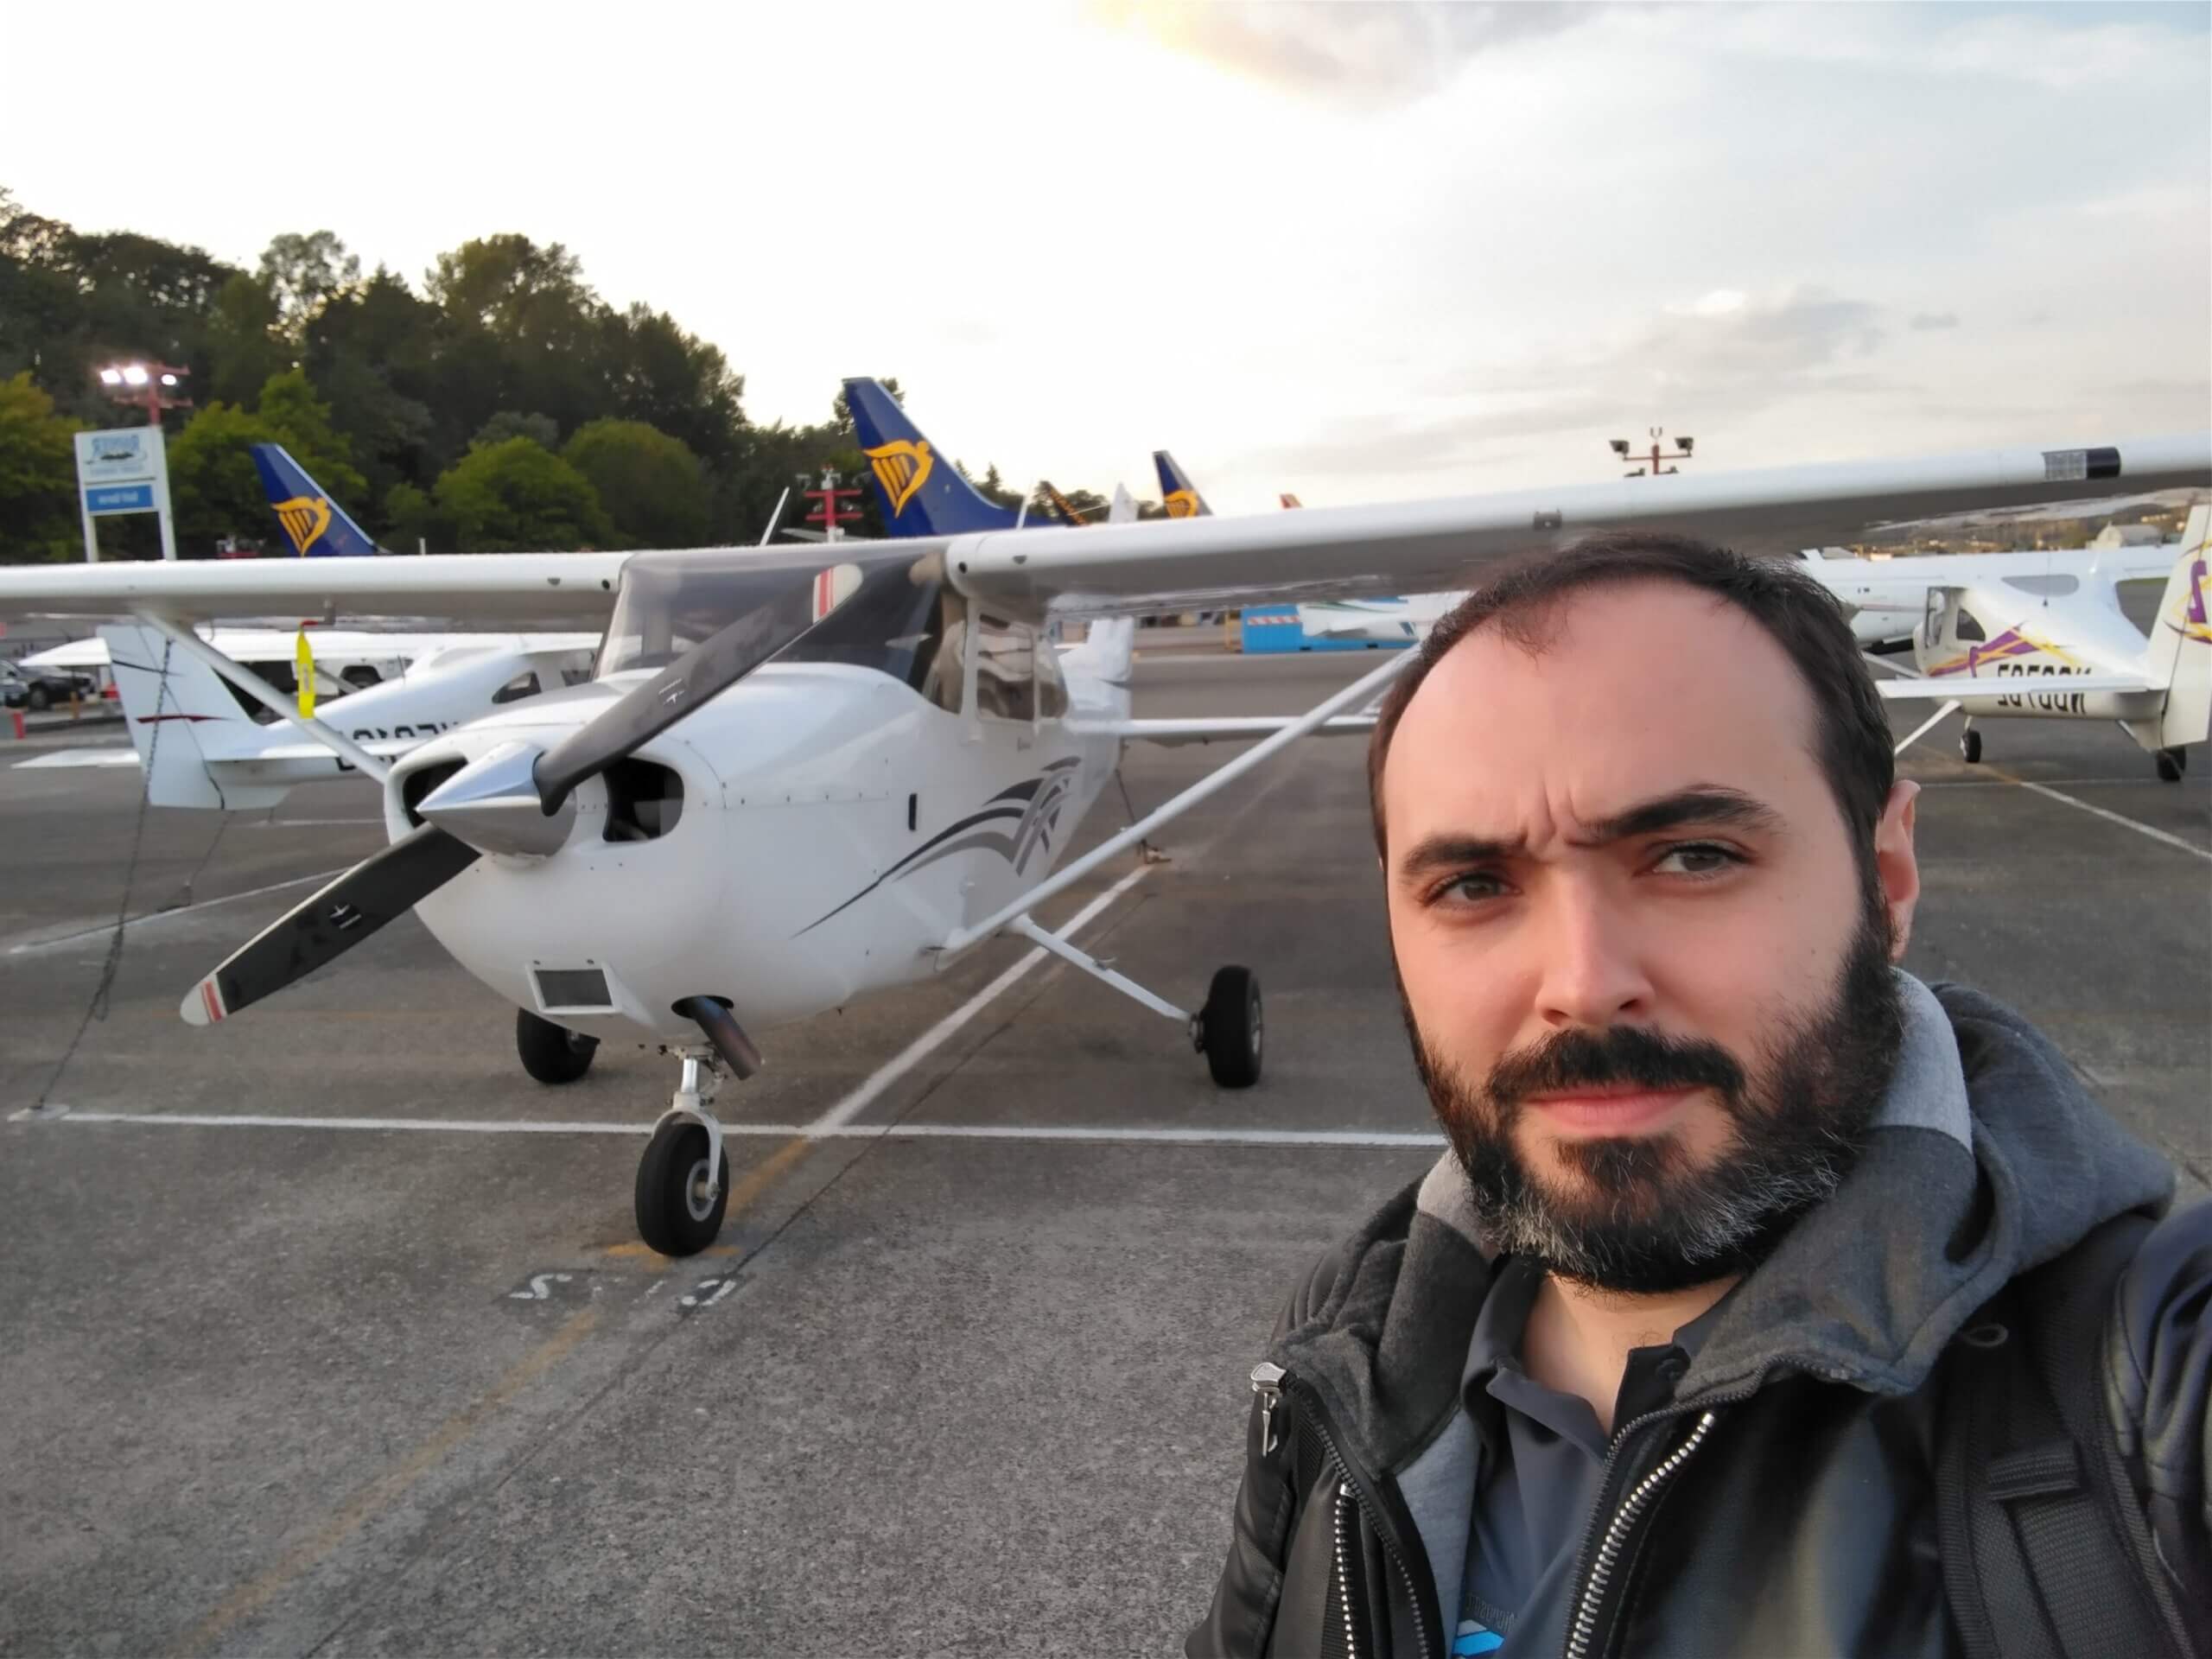 Lionel standing in front of a small plane